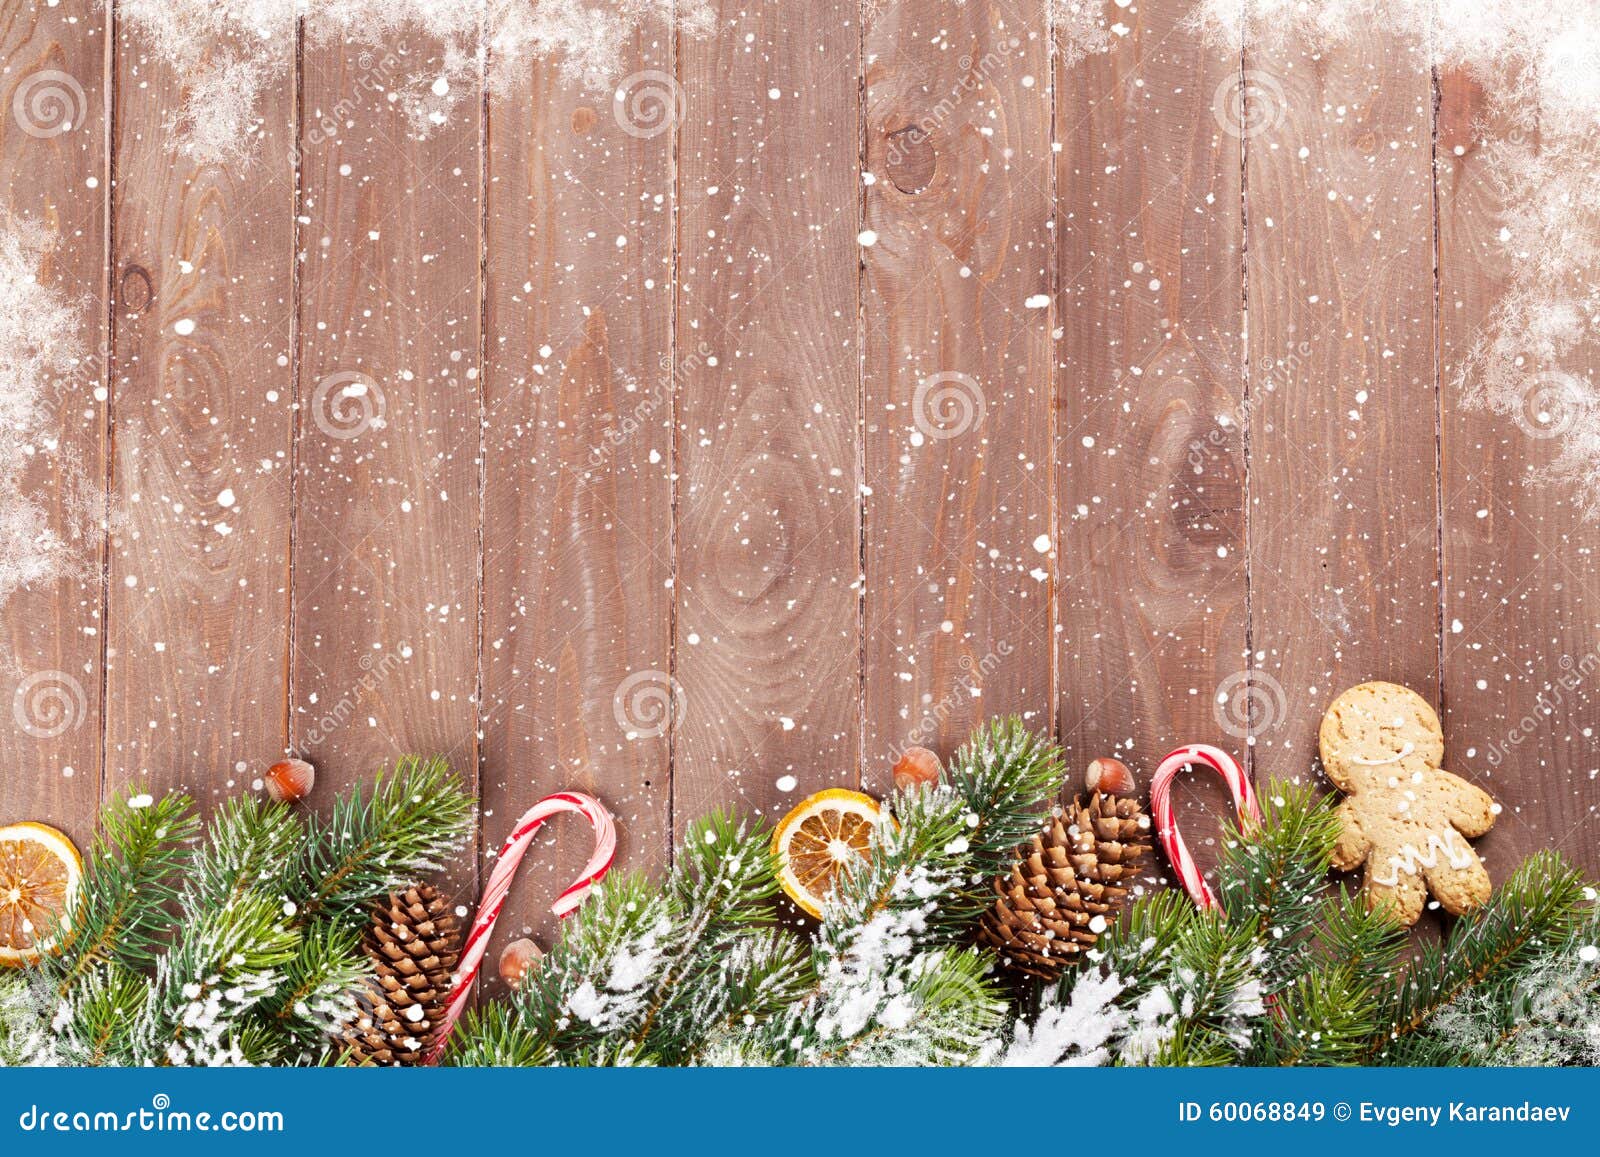  Christmas Background With Fir Tree And Food Decor Stock 